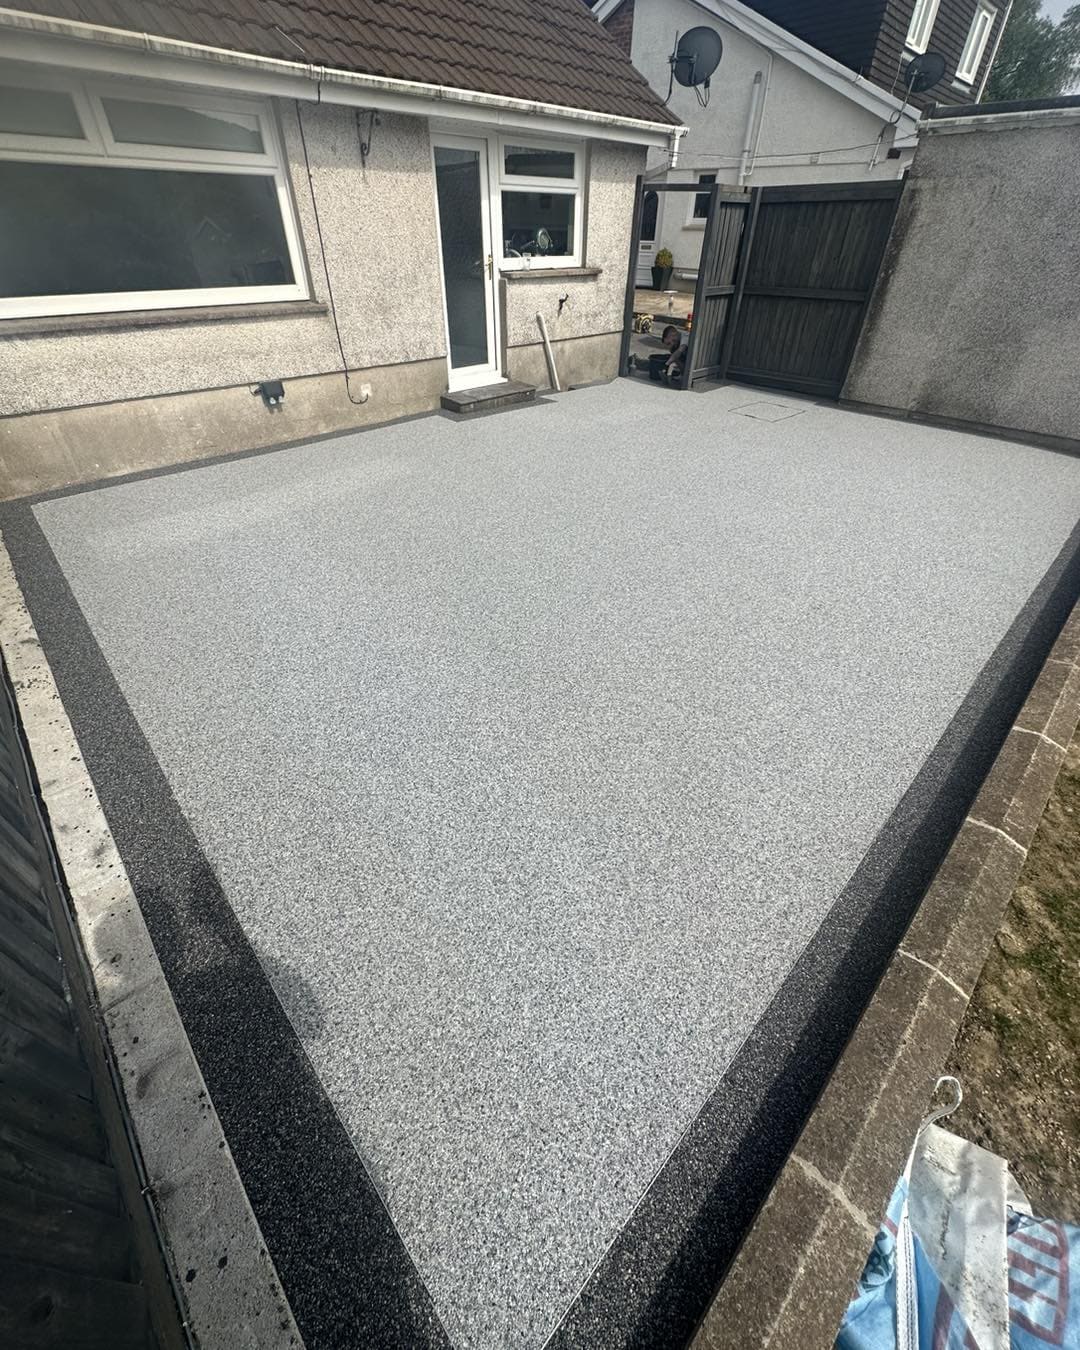 Side view of completed resin bound patio installation in Rhyd-Y-Fro, Pontardawe